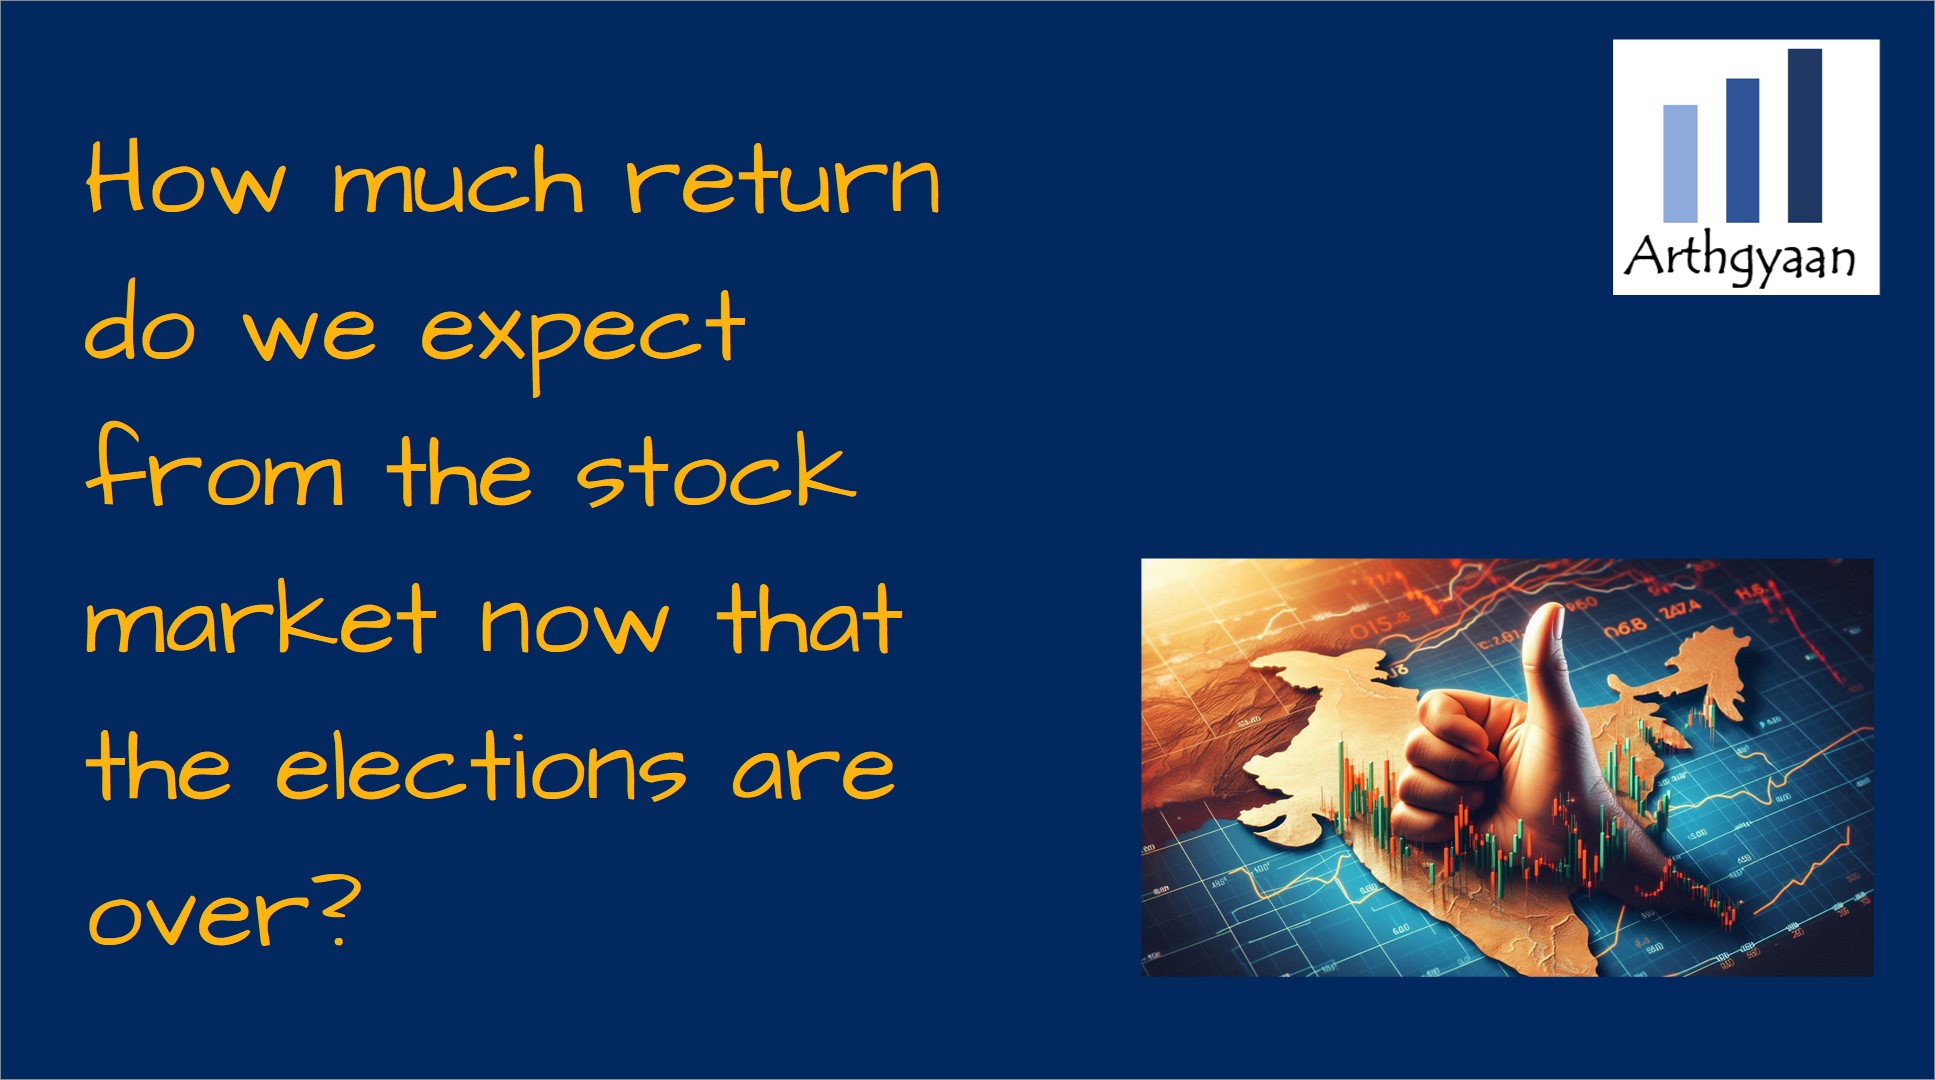 How much return do we expect from the stock market now that the elections are over?